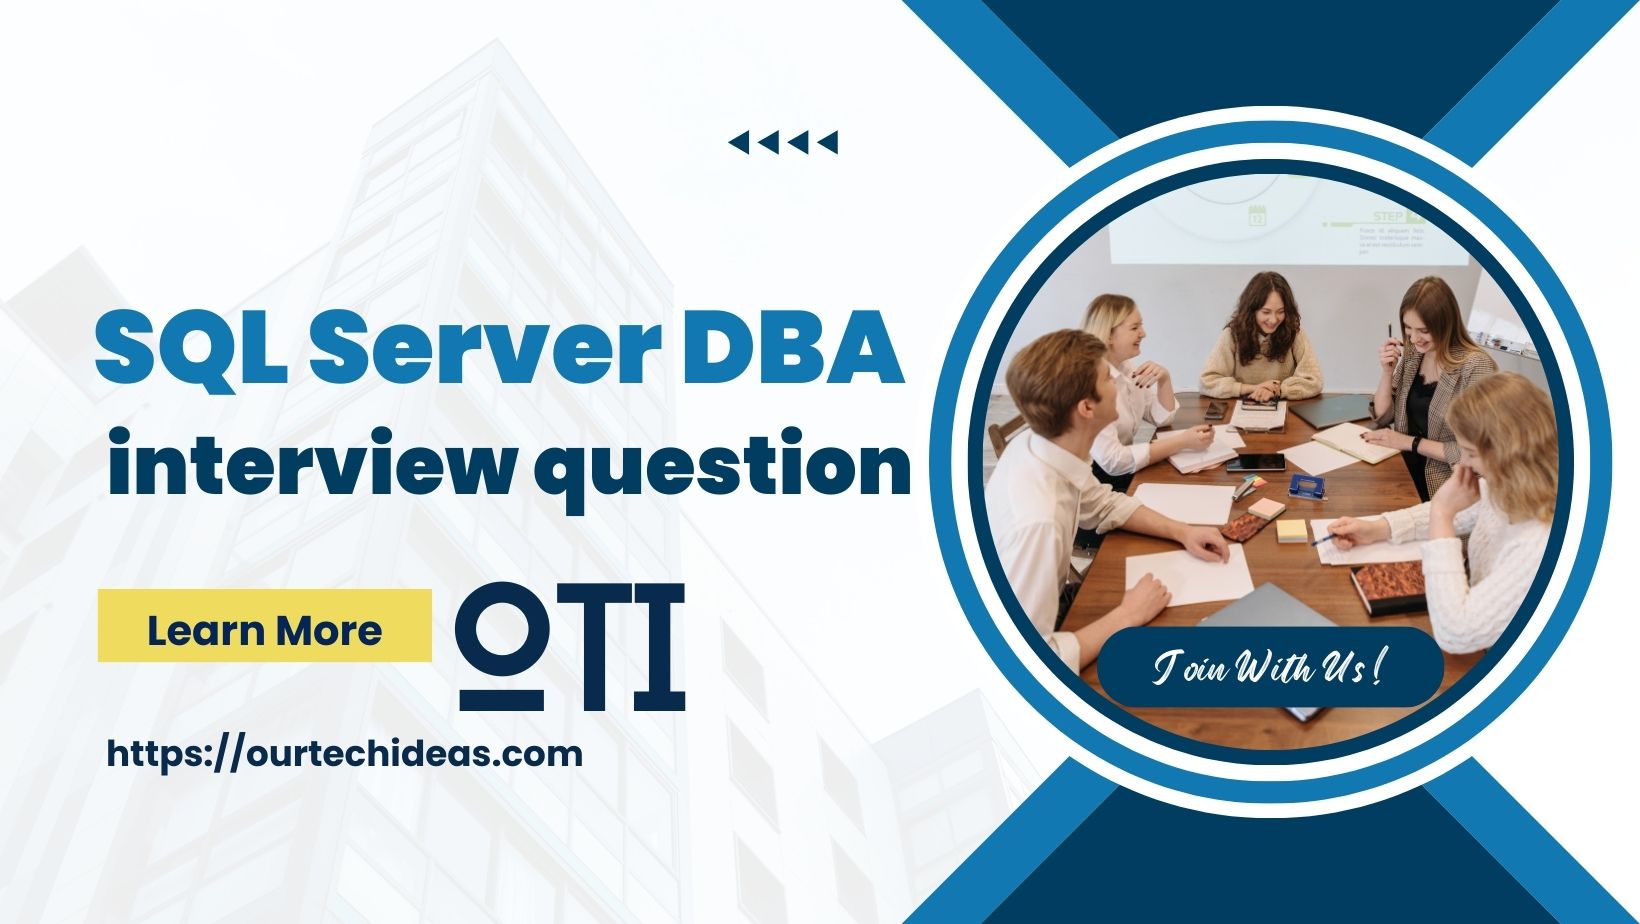 SQL Server DBA interview question from !nf0$y$